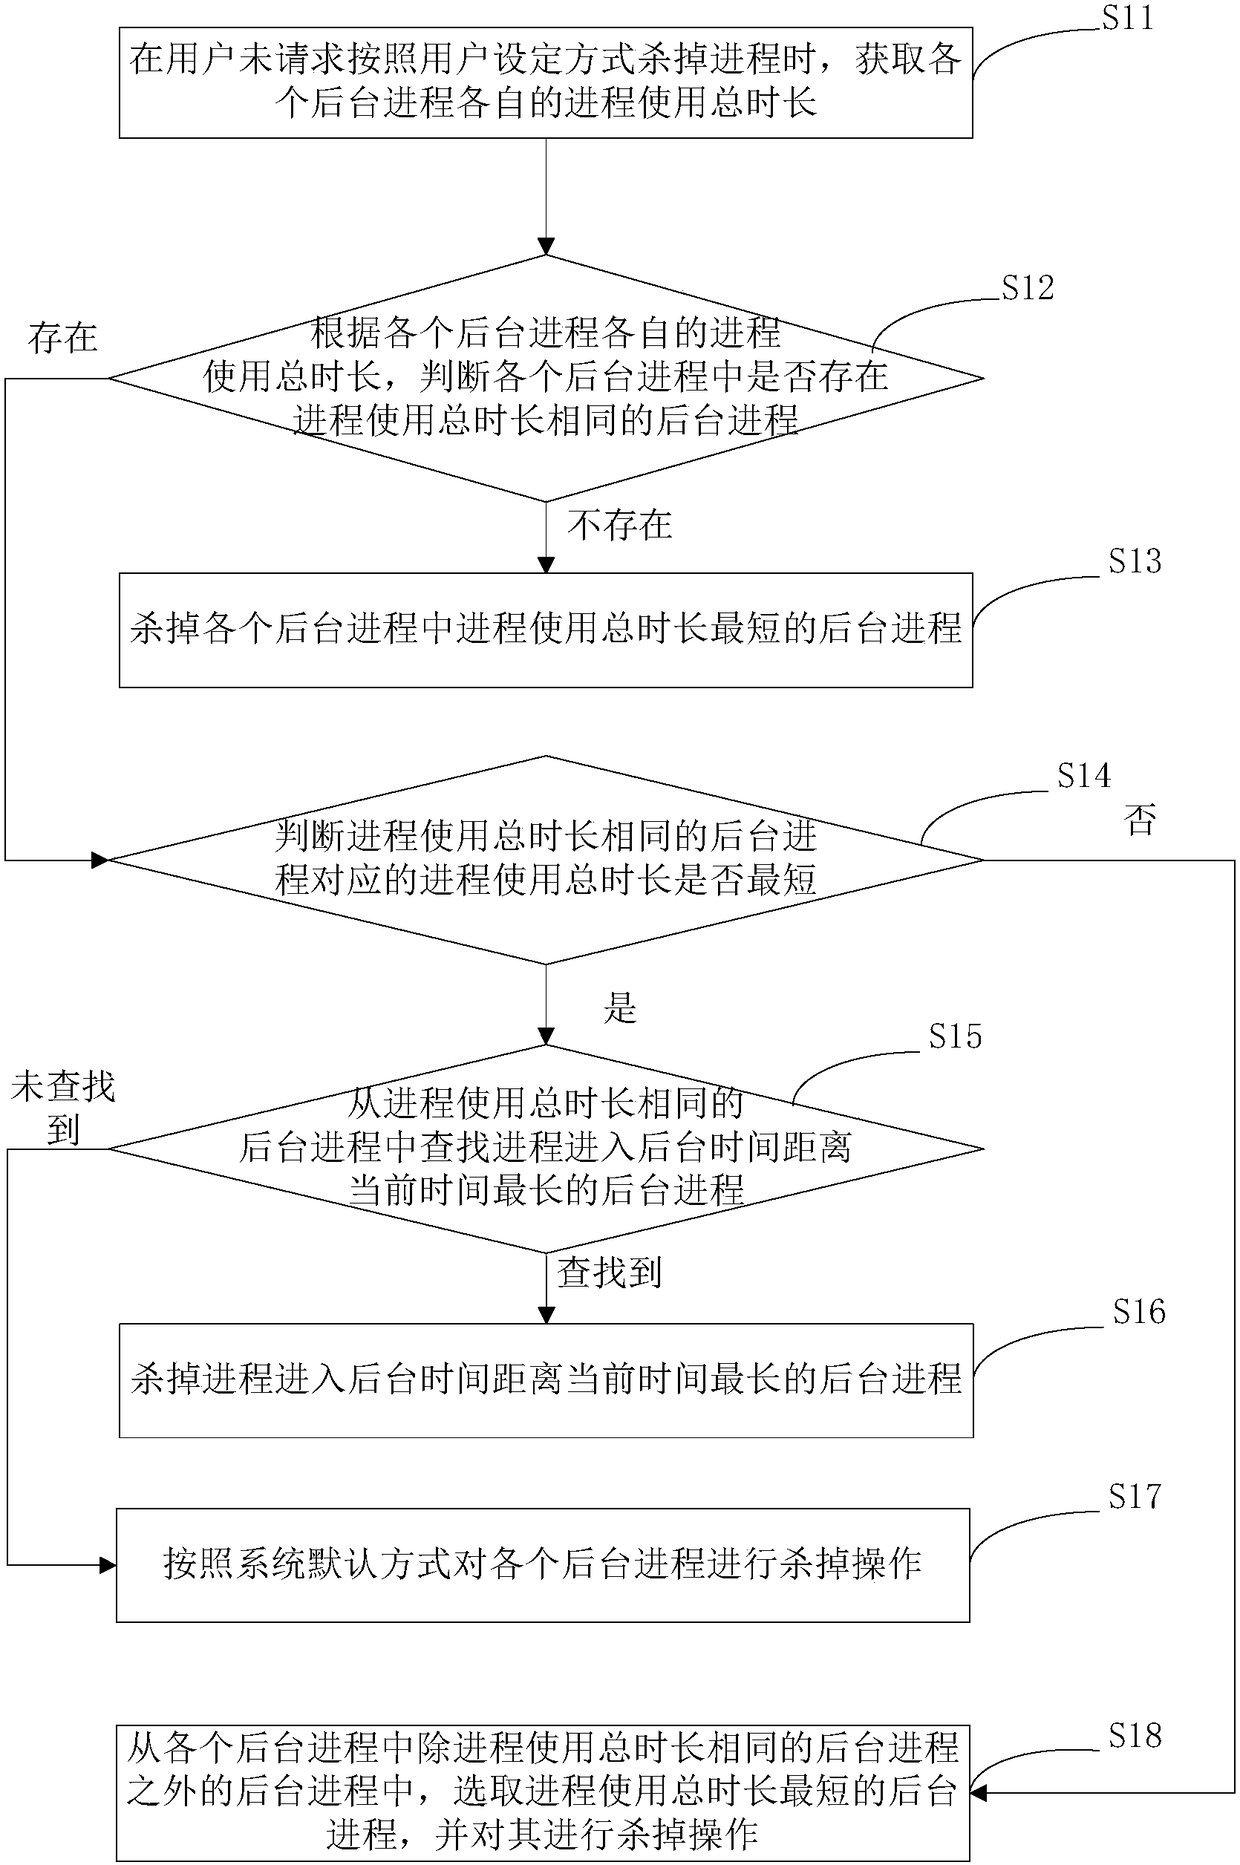 Process management method and device